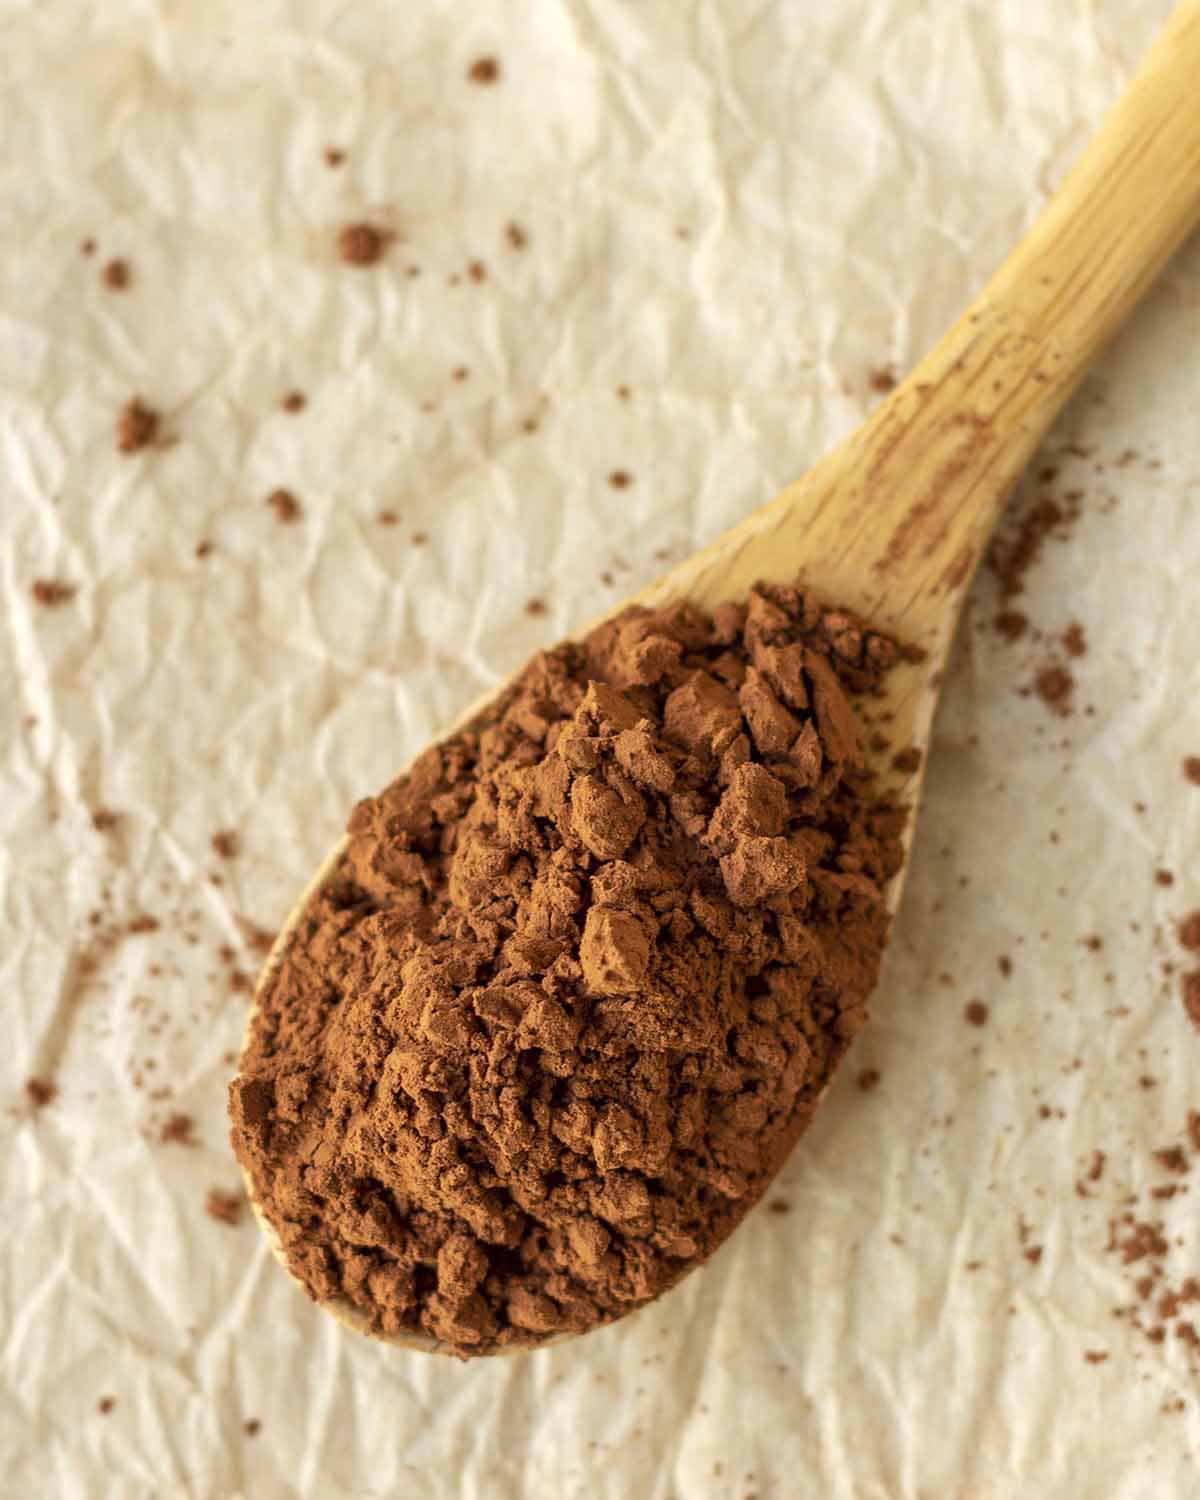 Cocoa powder in a wood spoon.